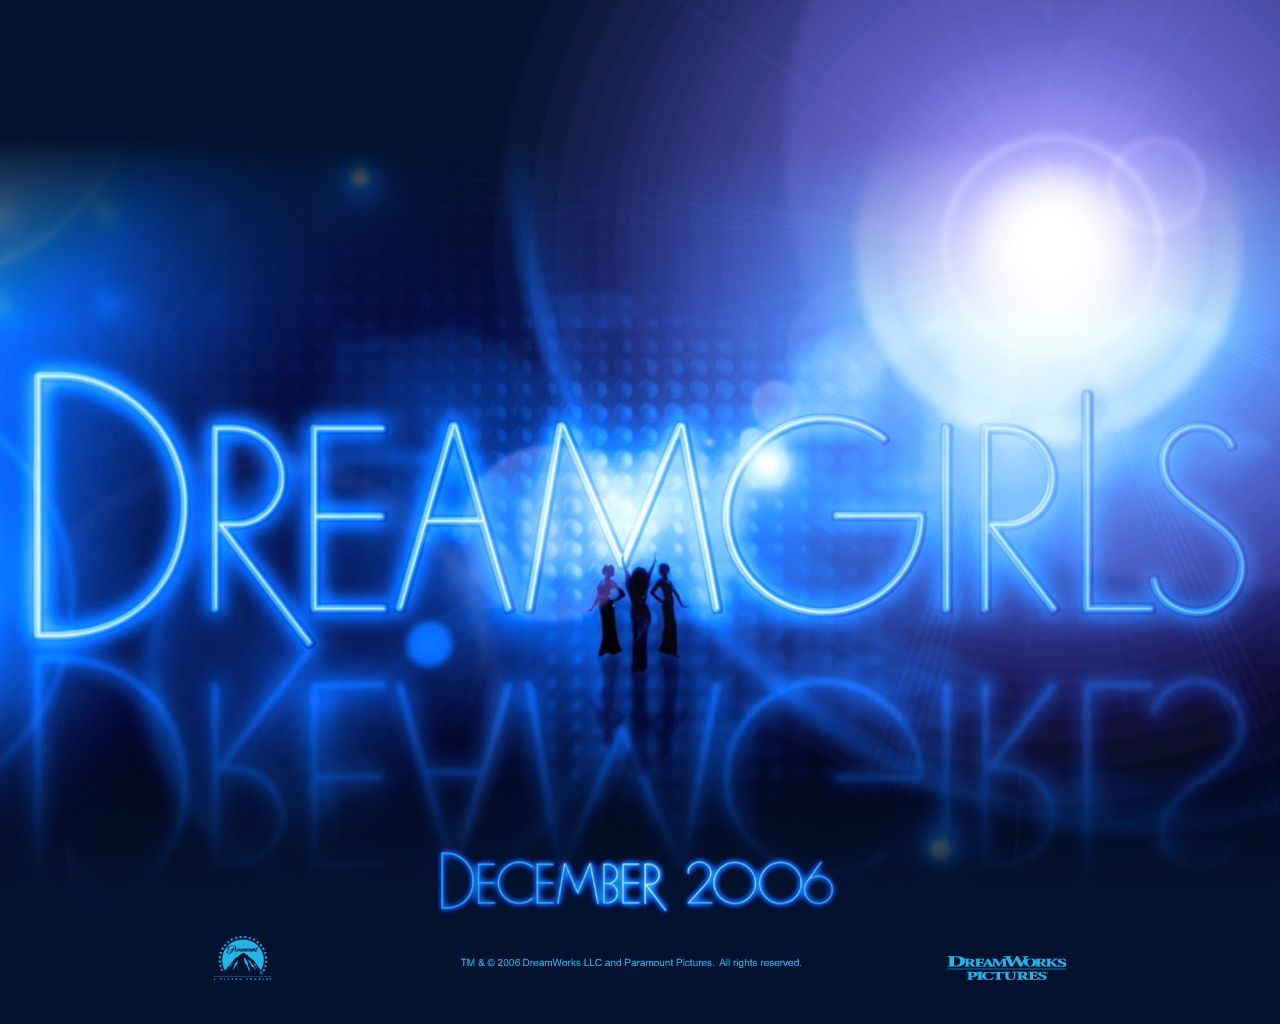 Dreamgirls | Free Desktop Wallpapers for HD, Widescreen and Mobile